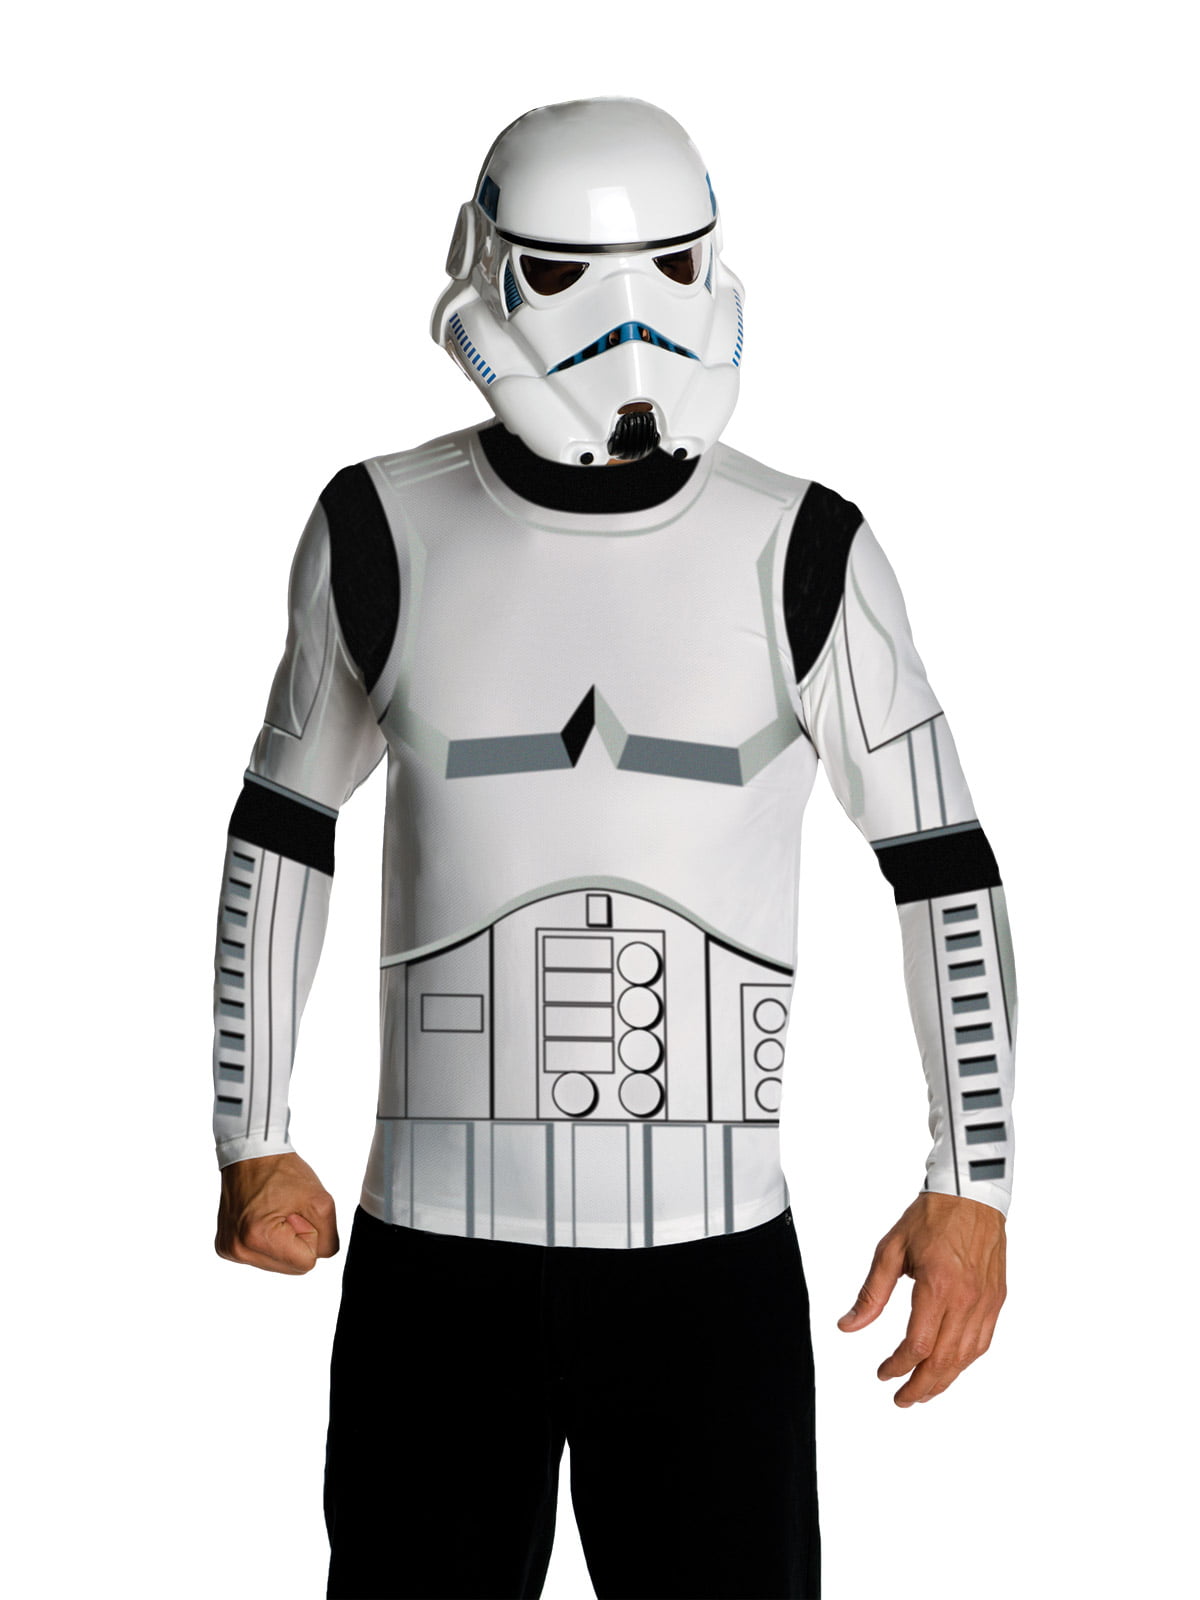 Featured image for “Storm Trooper Dress Ups:  Long Sleeve Tops”